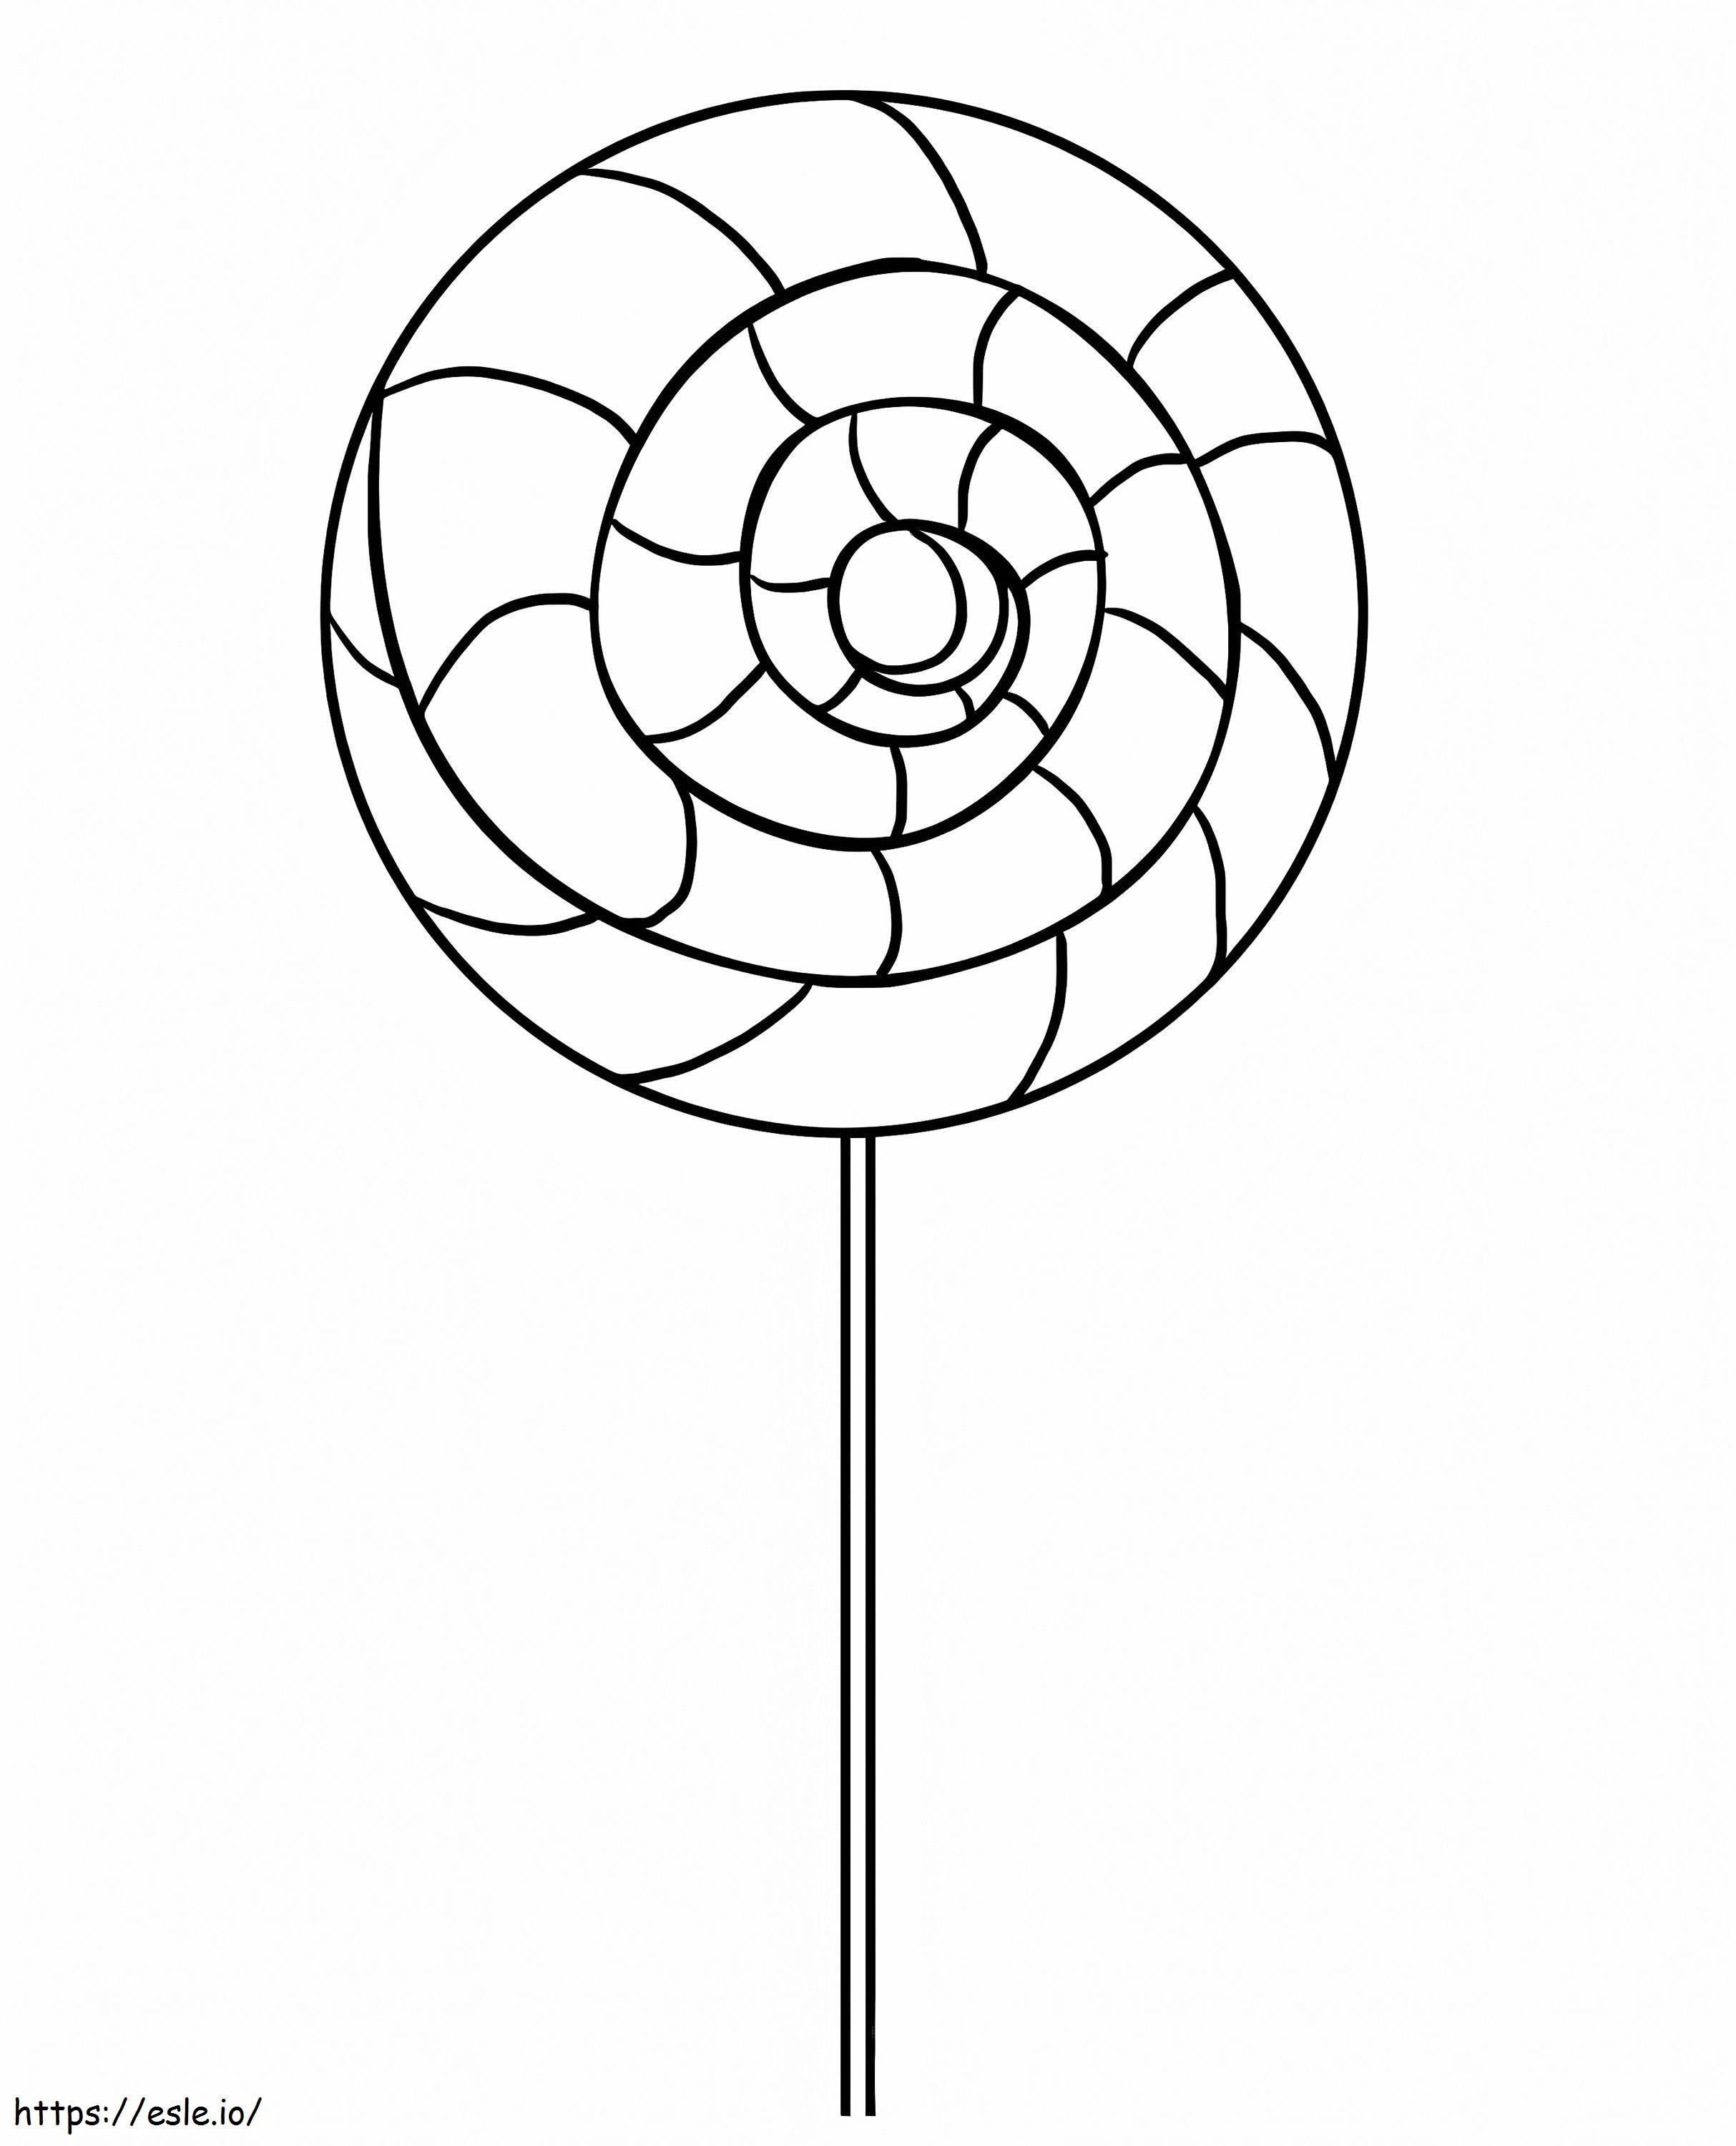 Sweet Lollipop coloring page